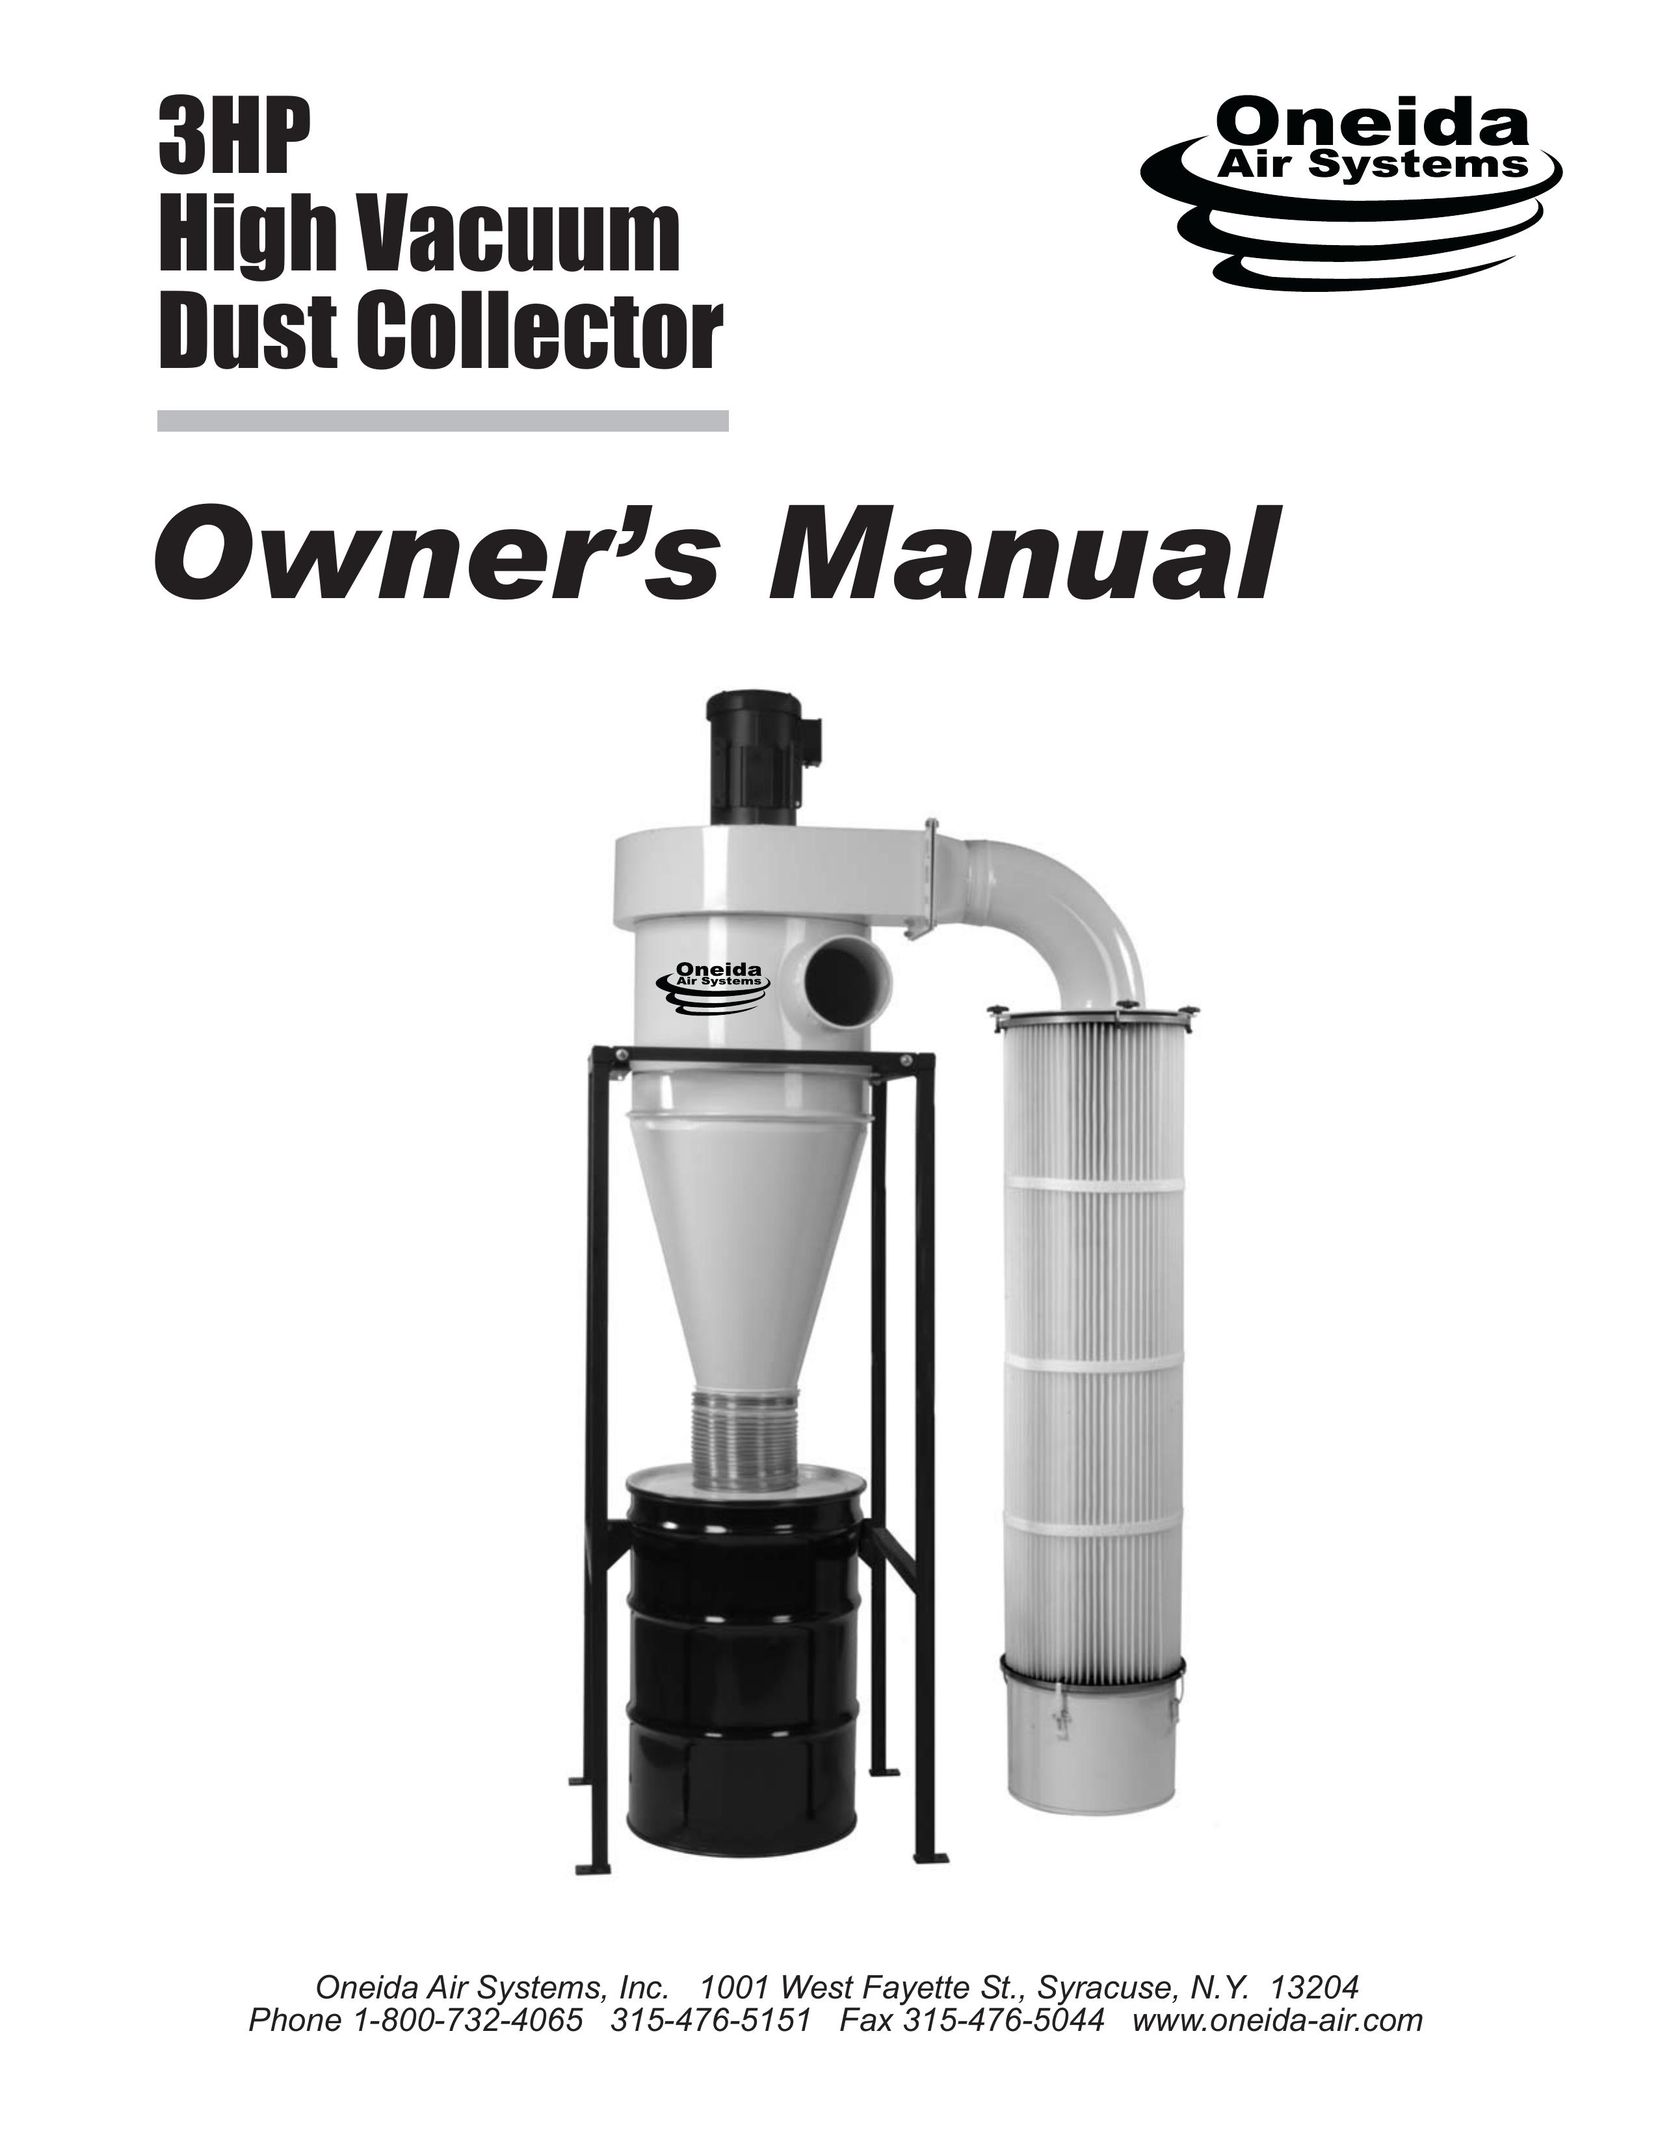 Oneida Air Systems 2005c3HP Dust Collector User Manual